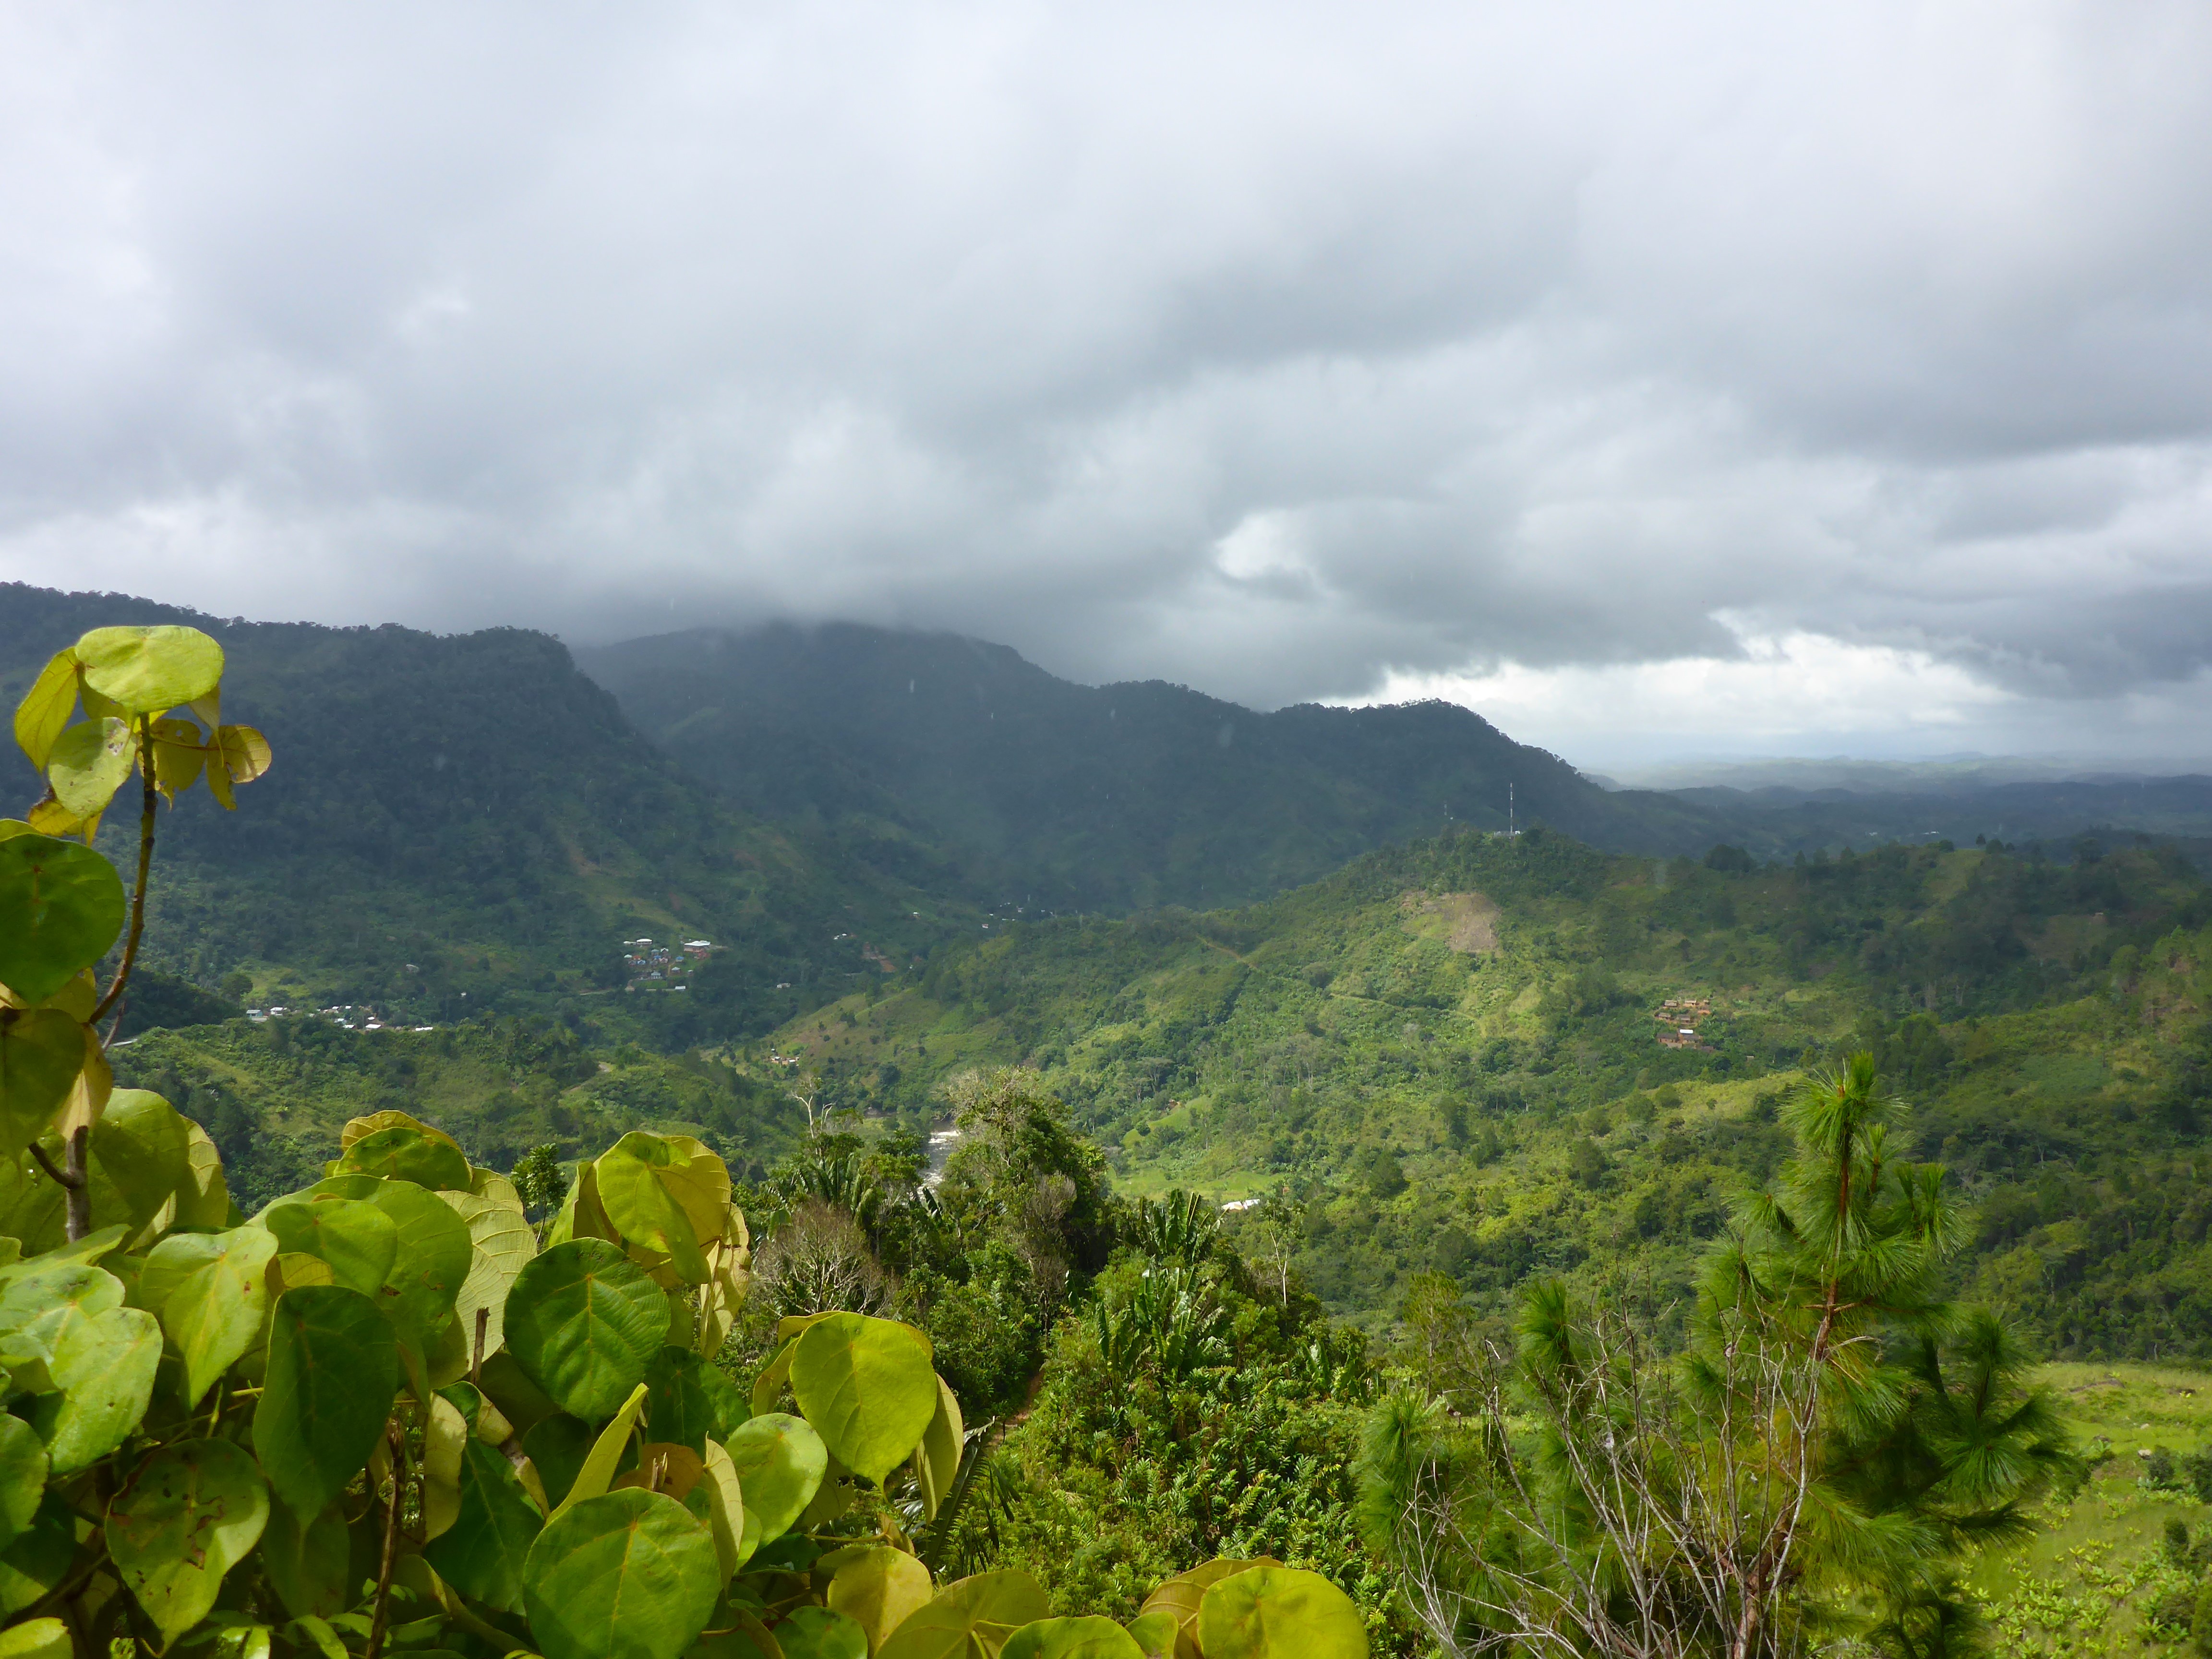 Verdant mountainous landscape in Madagascar, with dense tropical foliage in the foreground and rolling hills under a stormy sky in the background, suggesting the rich biodiversity and dynamic weather of the region.